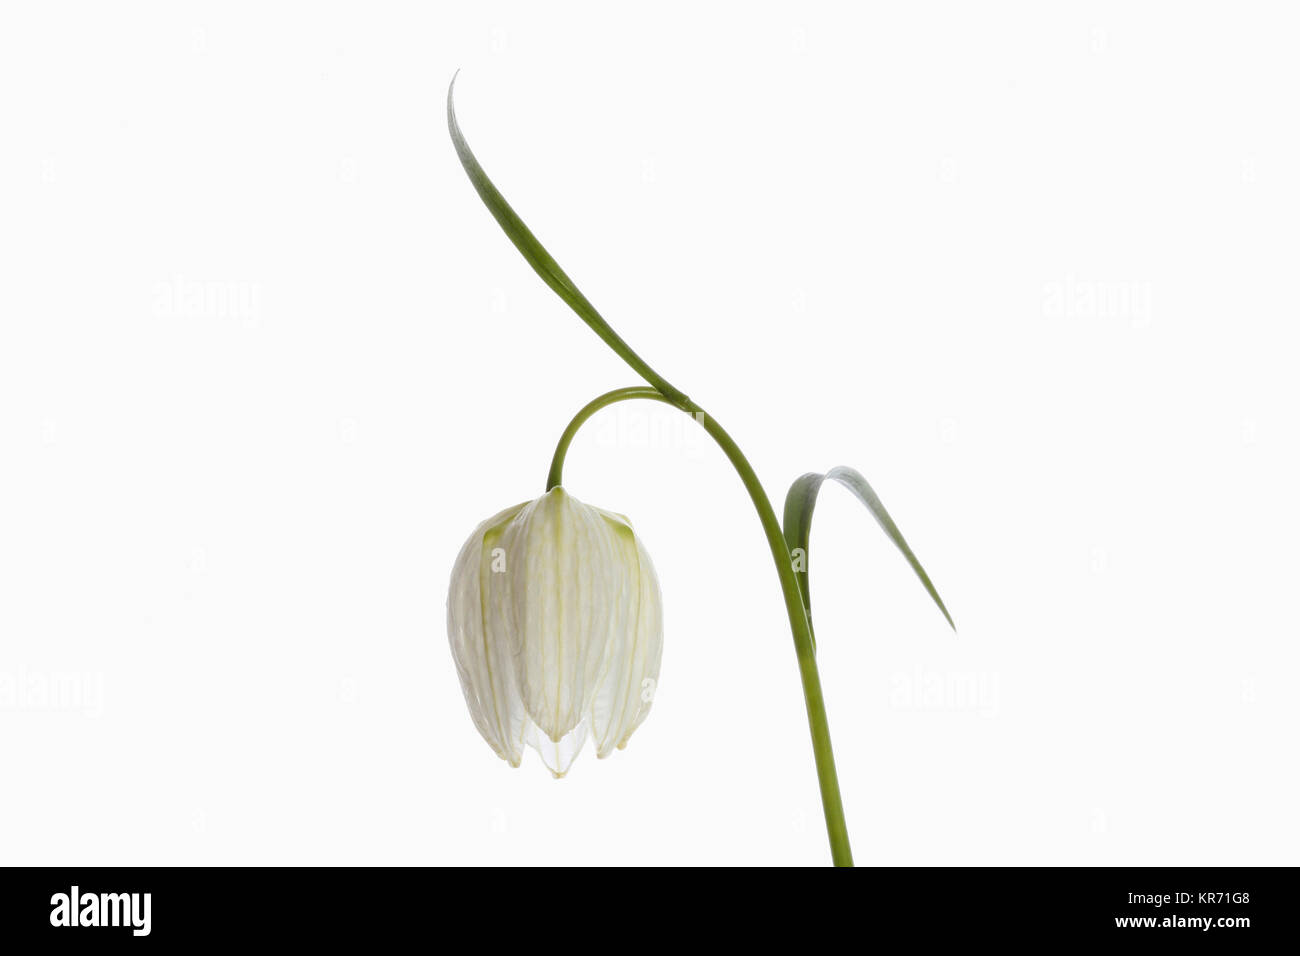 Snakes Head Fritillary, Fritillaria meleagris,  Single white flower on stem, shown against a pure white background. Stock Photo